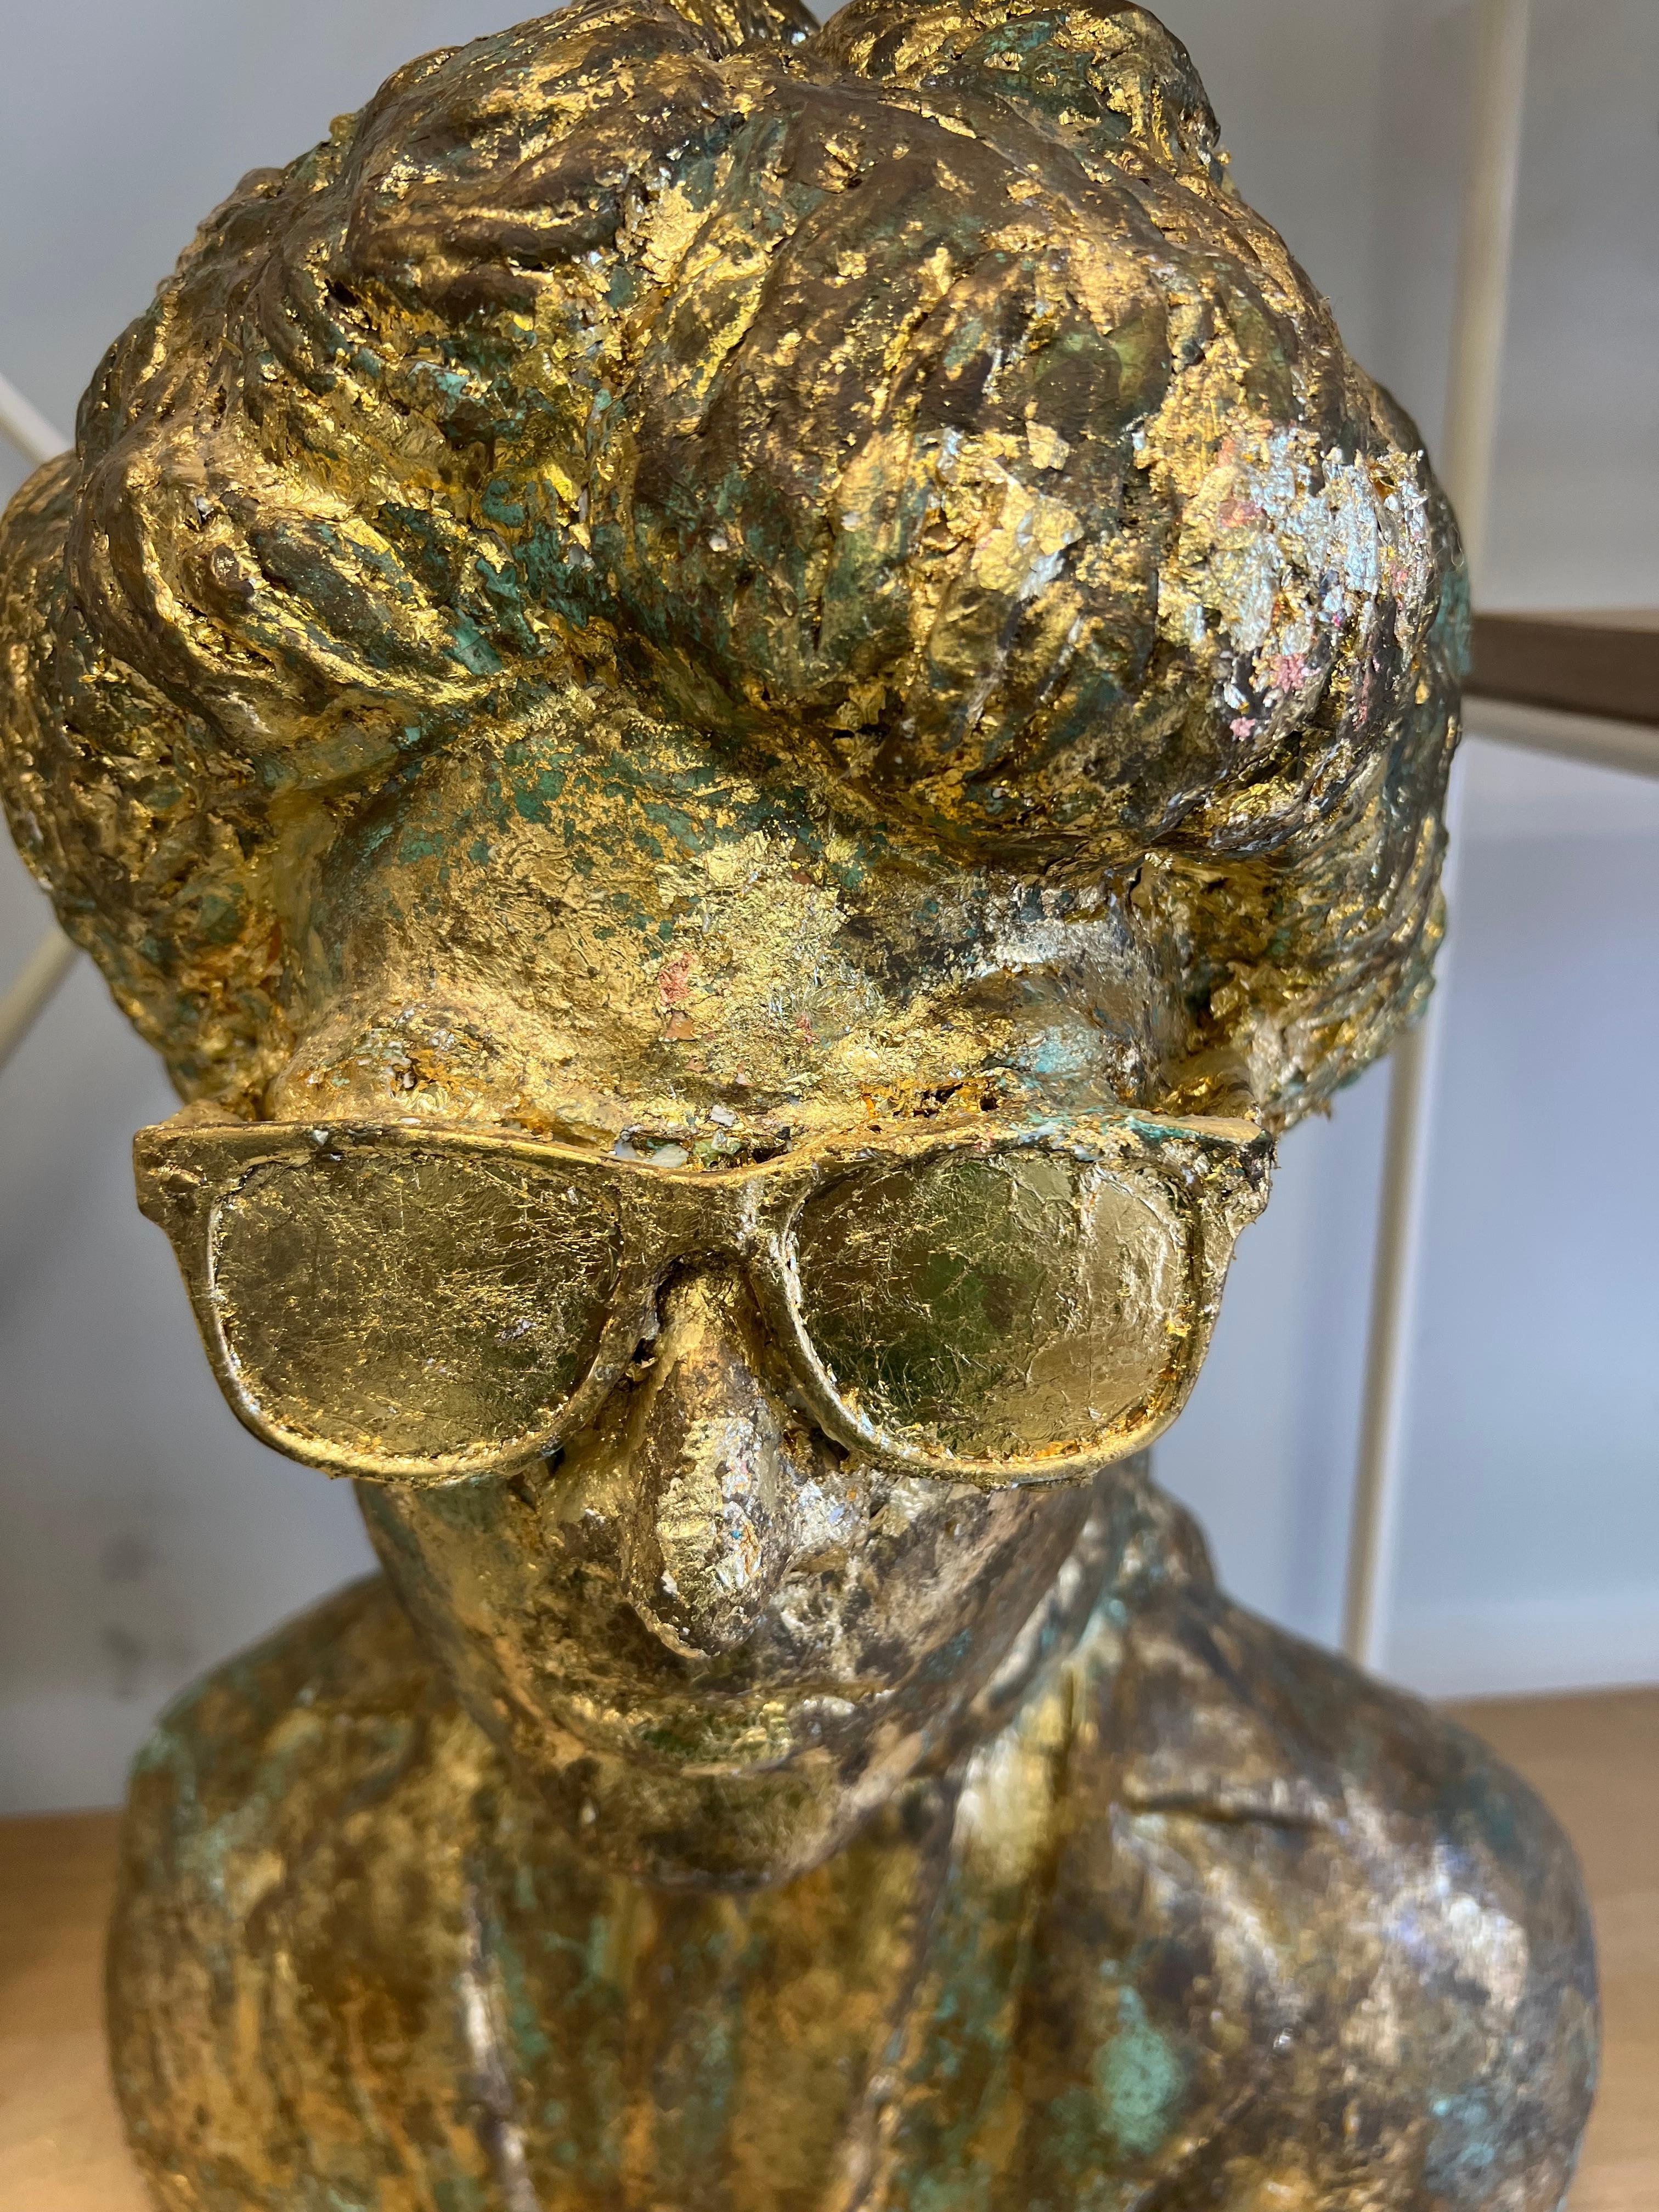 This fantastic sculpture of Bob Dylan is made of plaster and finished in a verdigris patina and is gold leafed.  Acquired from an Augusta estate, where there was a plethora of Bob Dylan art.  Very cool piece!  After: Victor Demanet